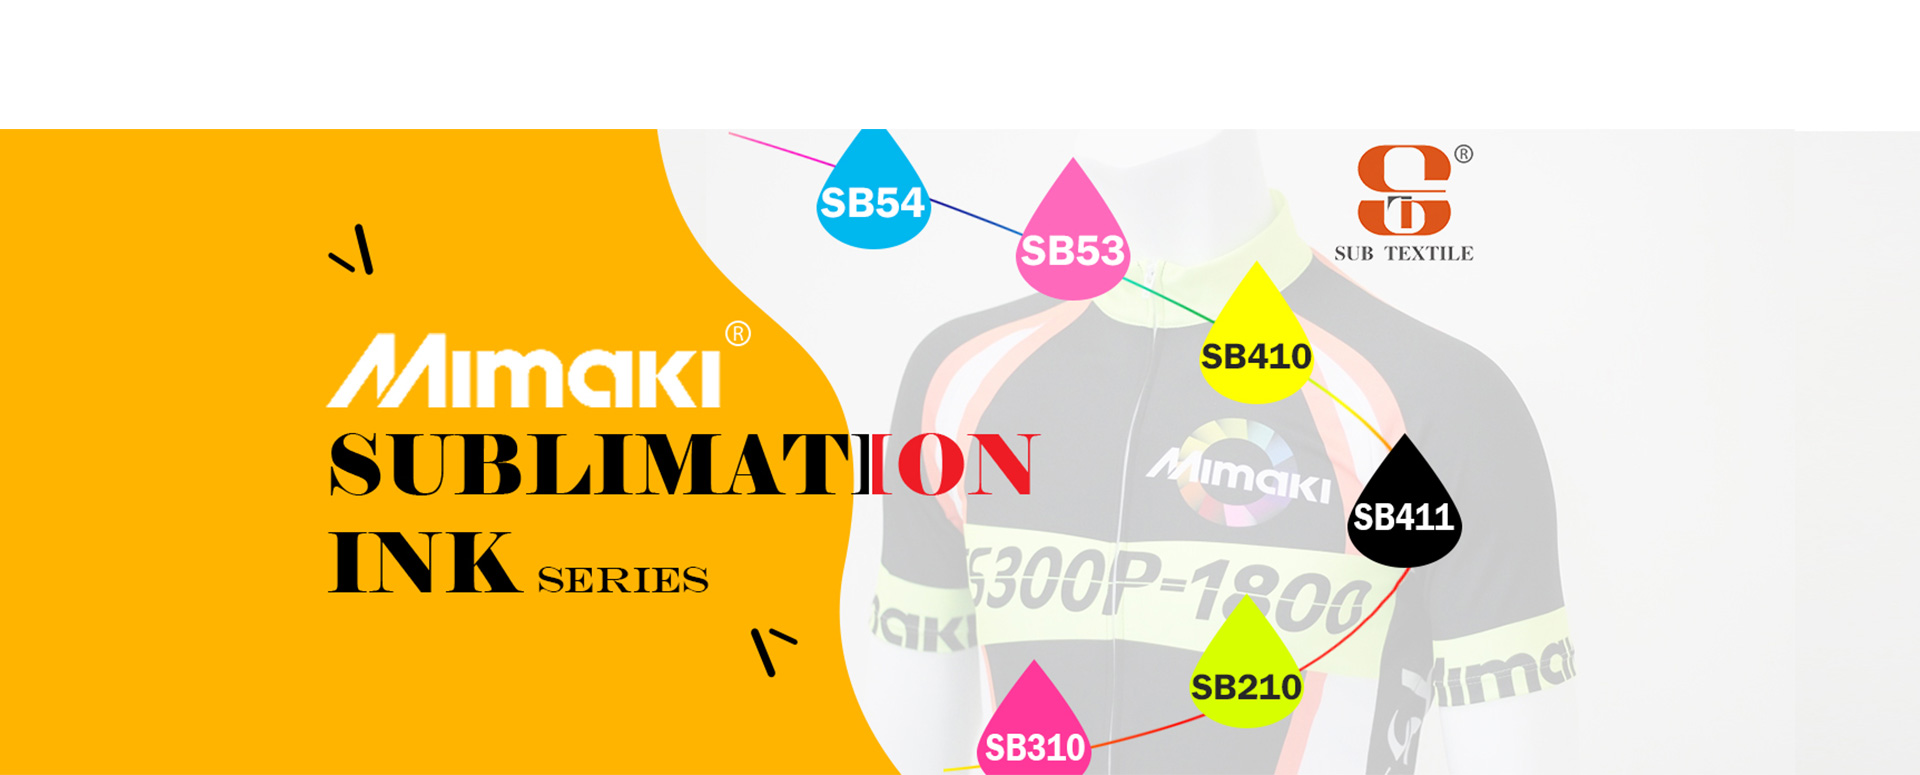 What do you know about Mimaki sublimation ink?